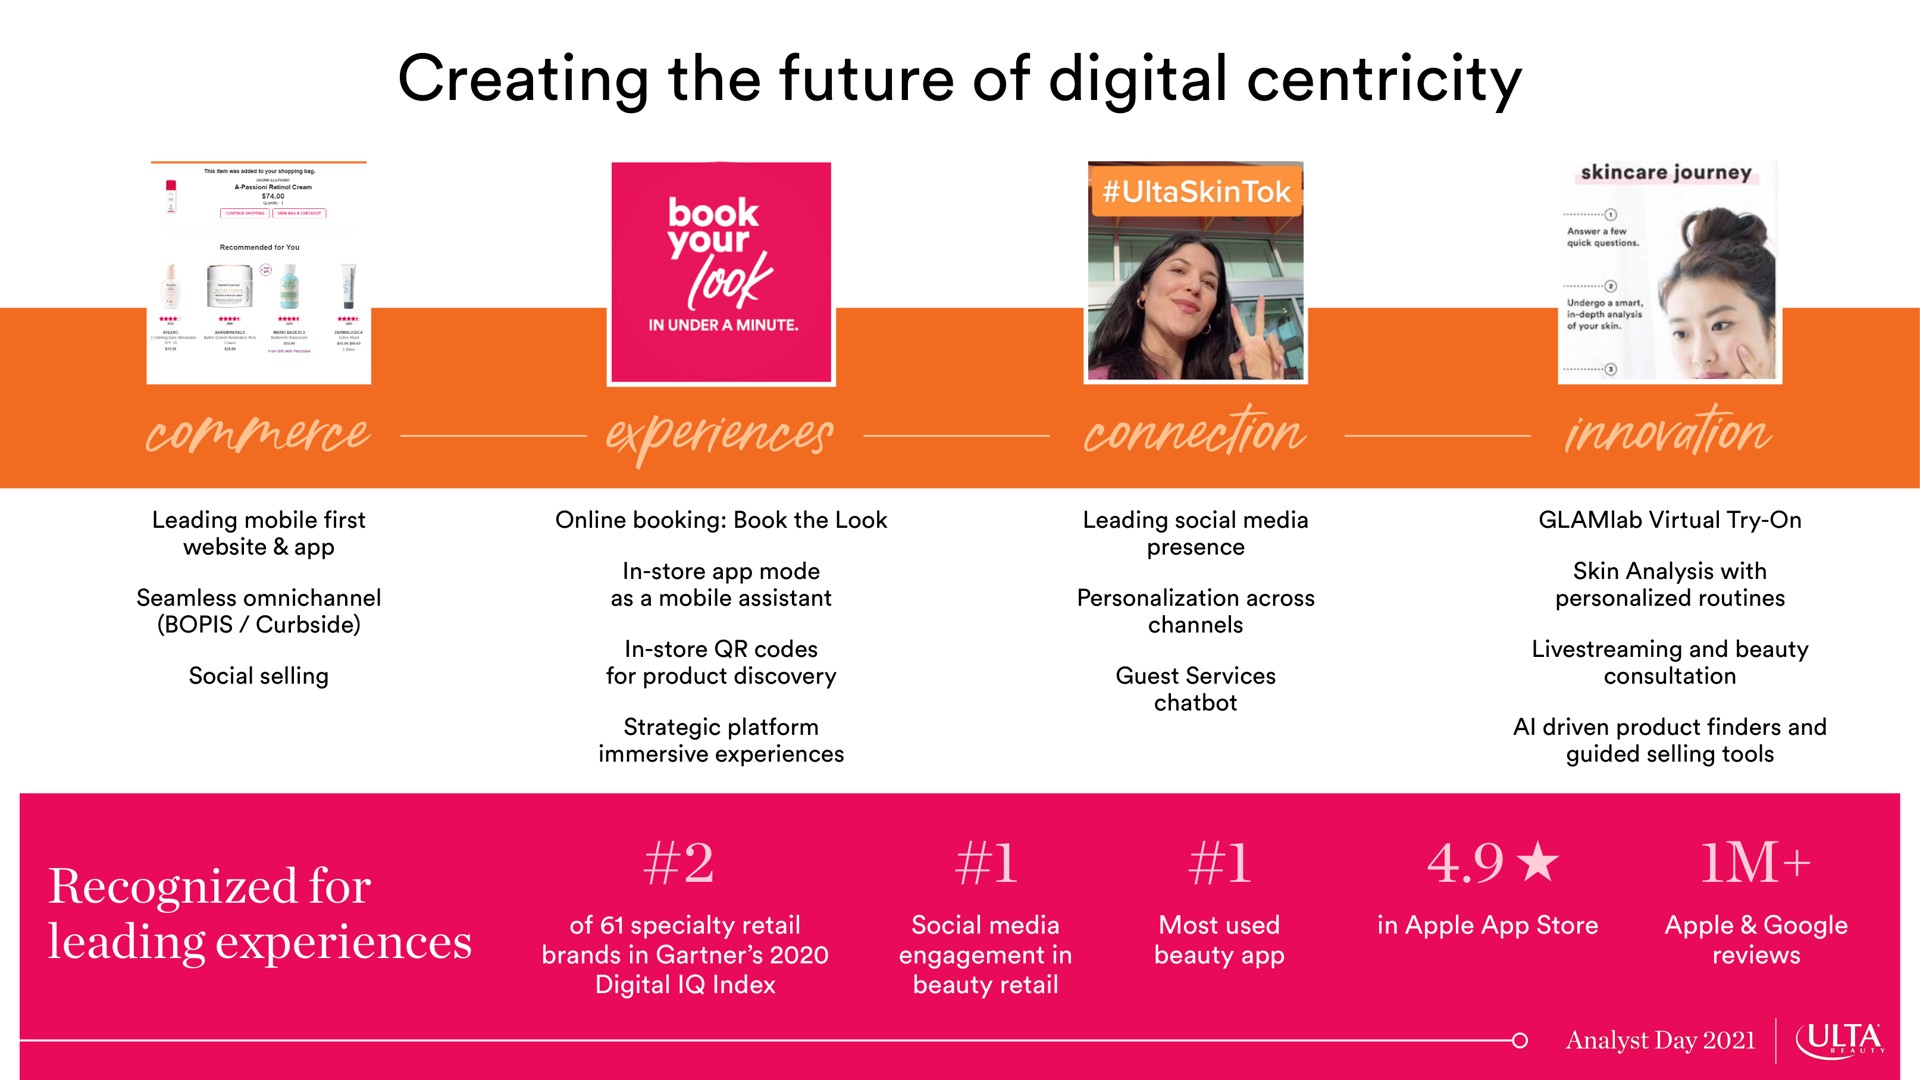 creating the future of digital centricity commerce experiences connection innovation rat | Ulta Beauty